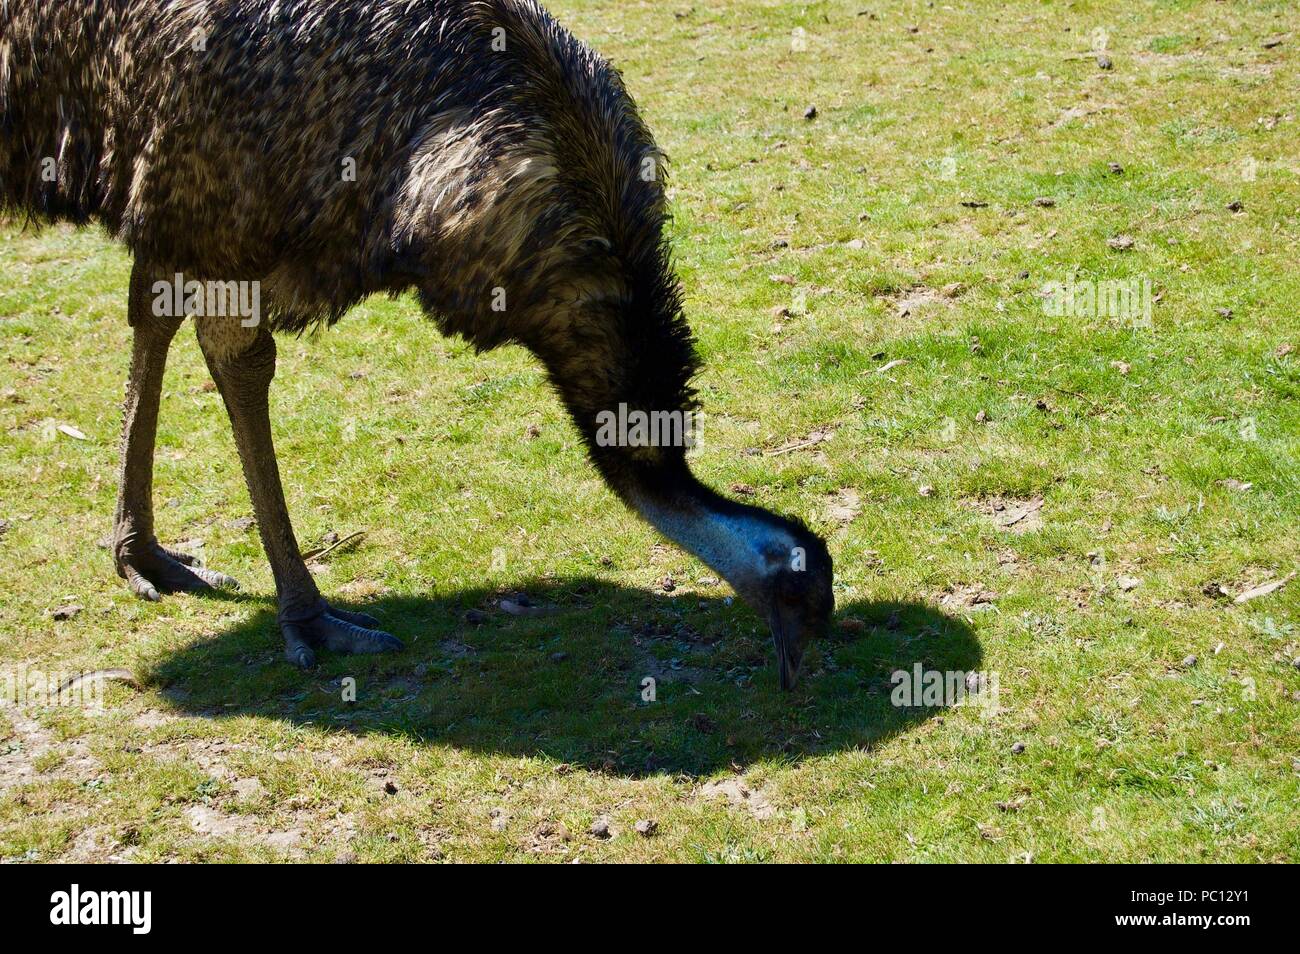 Australian Wildlife: Beautiful and curious brown emu close-up in a park in Victoria (Australia) close to Melbourne Stock Photo